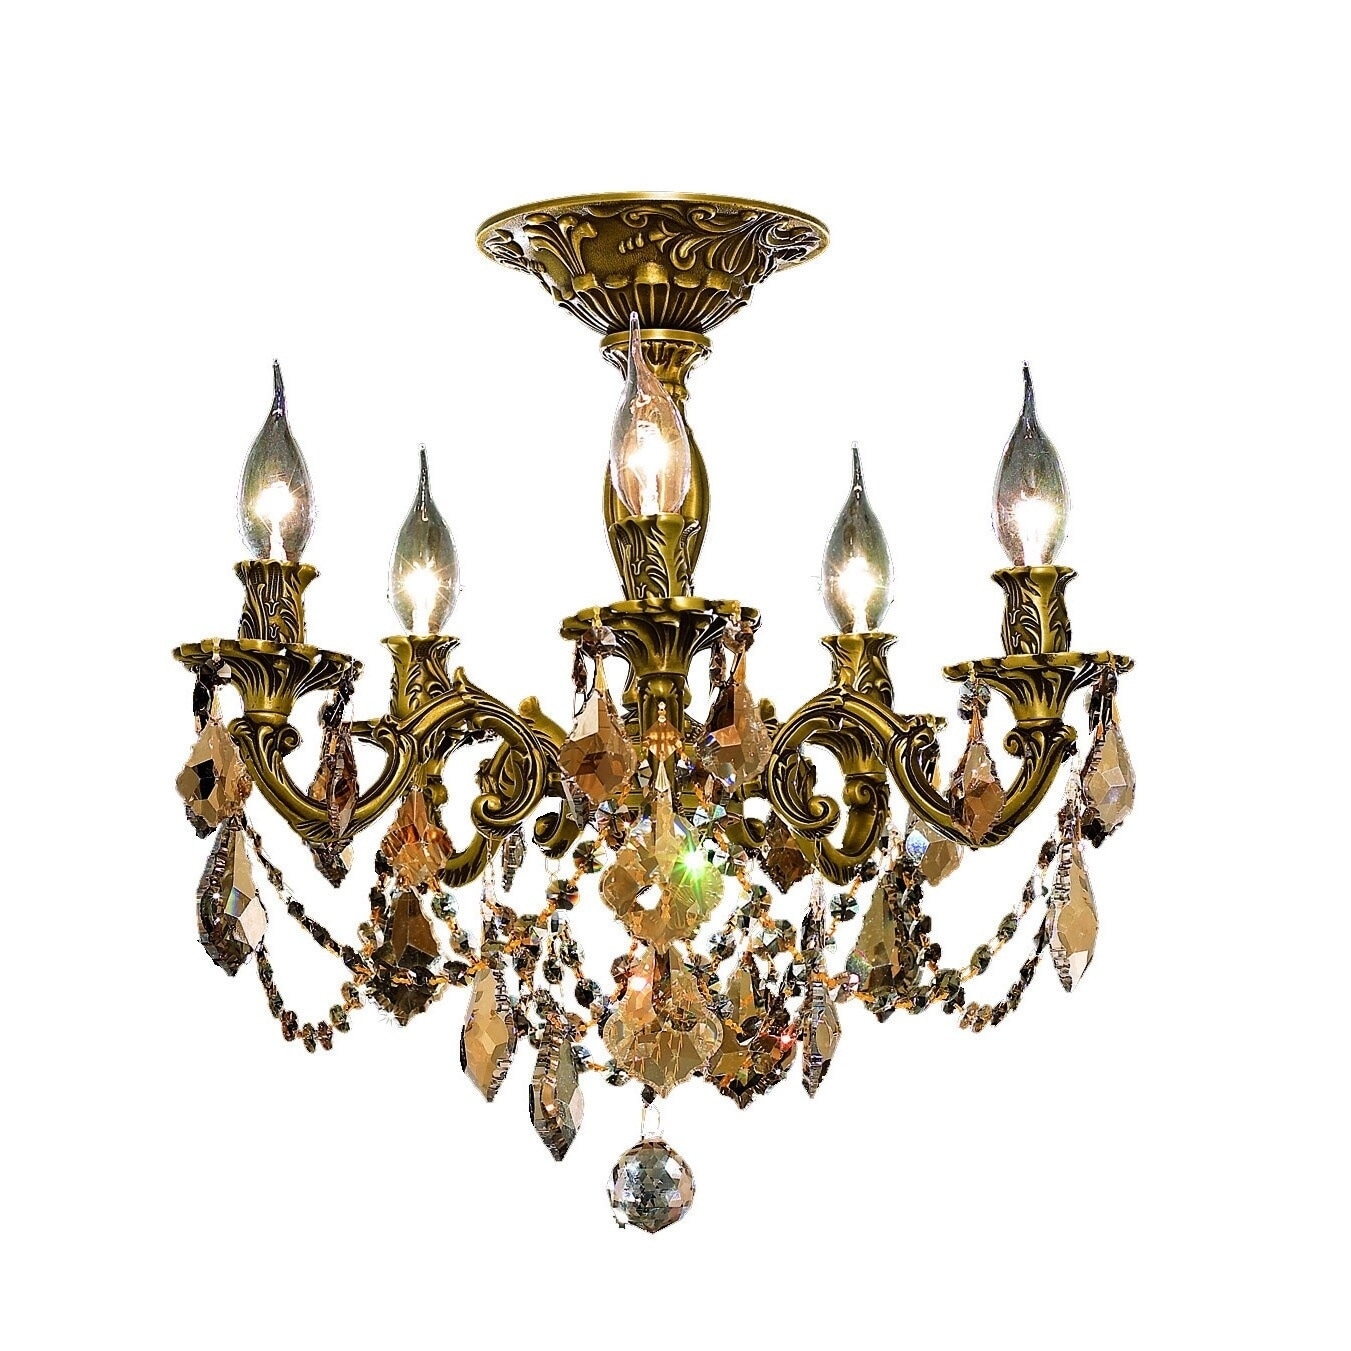 Christopher Knight Home Meilen 5 light Royal Cut Gold Crystal And French Gold Flush Mount (Crystal and AluminumFinish French GoldNumber of lights Five (5)Requires five (5) 60 watt max bulb (not included)Bulb type E12, 110 Volt 125 VoltDimensions 18 in